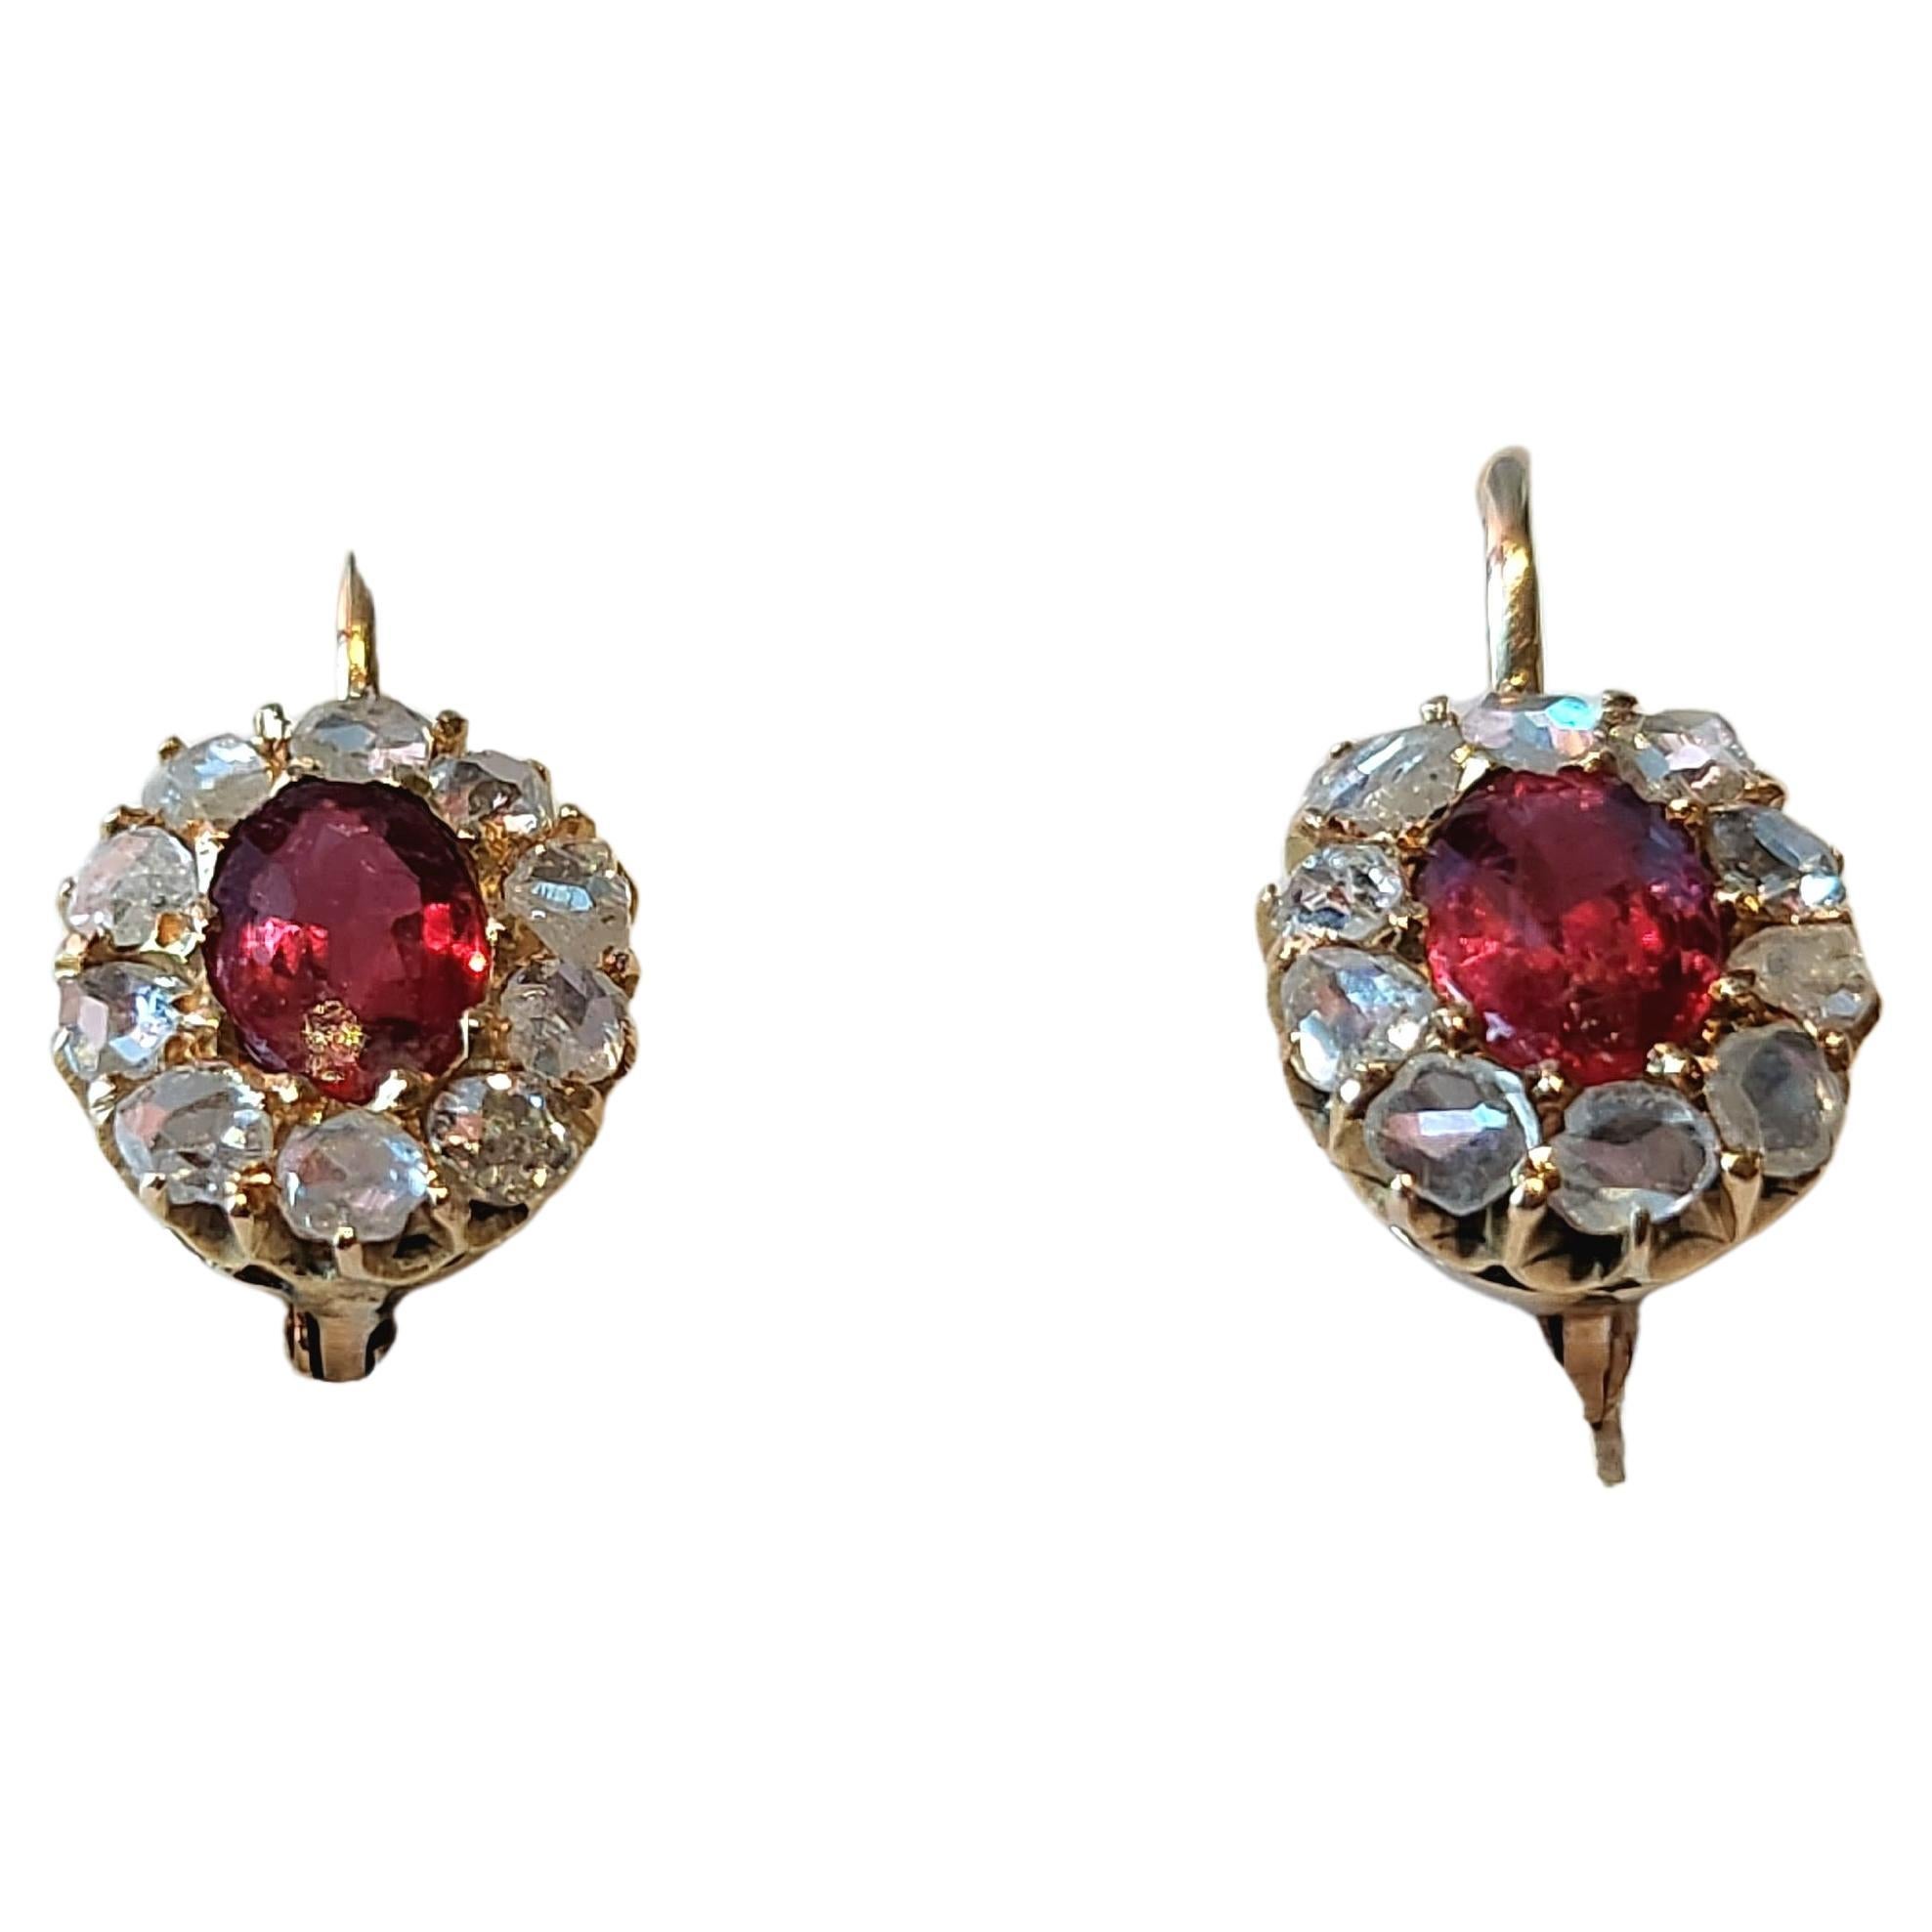 Antique imperial russian era 1907.c earrings centered with a ruby spinel blood color flanked with rose cut diamonds earrings head diameter 4mm×4.5mm and 1.5cm lenght earrings was made in odessa 1907.c hall marked 56 imperial russian gold standard